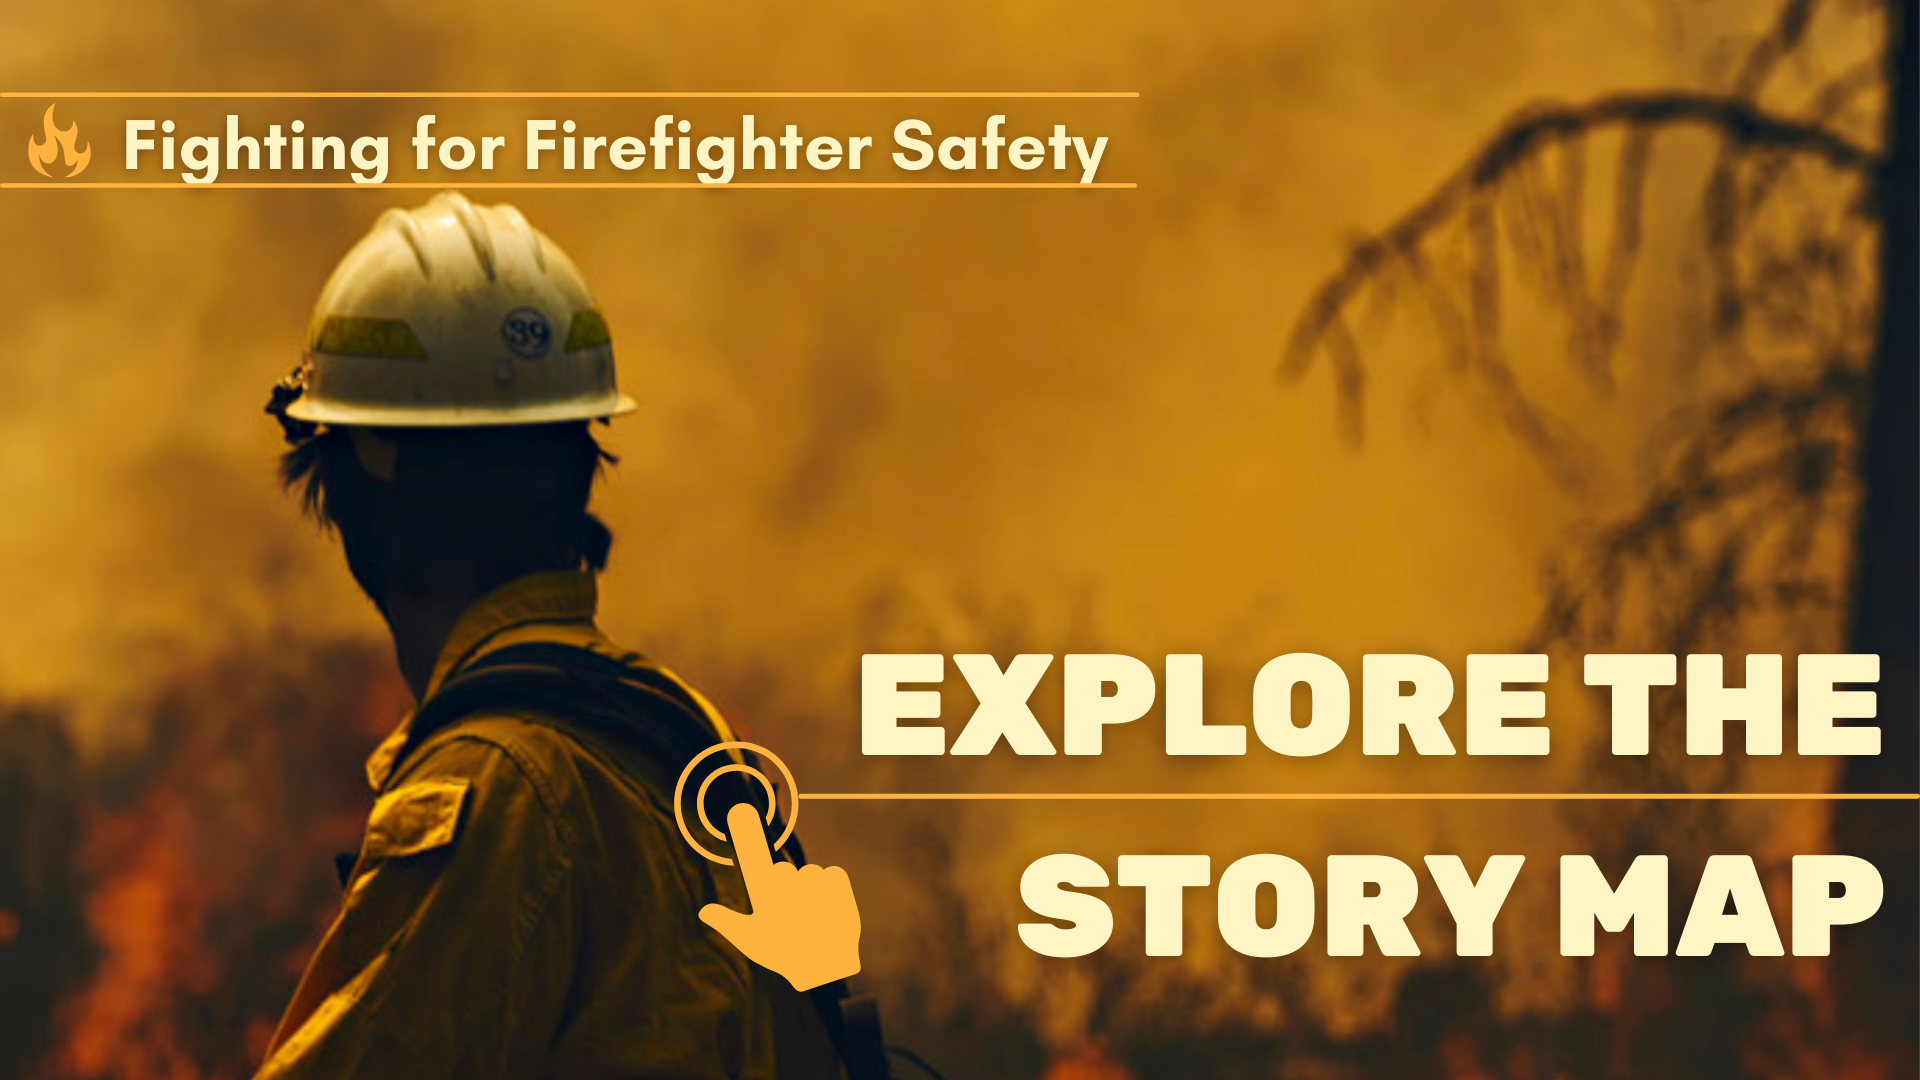 A firefighter with their back turned to the camera looks at a fire. Image text reads: "Fighting for Firefighter Safety" and "Explore the Story Map"